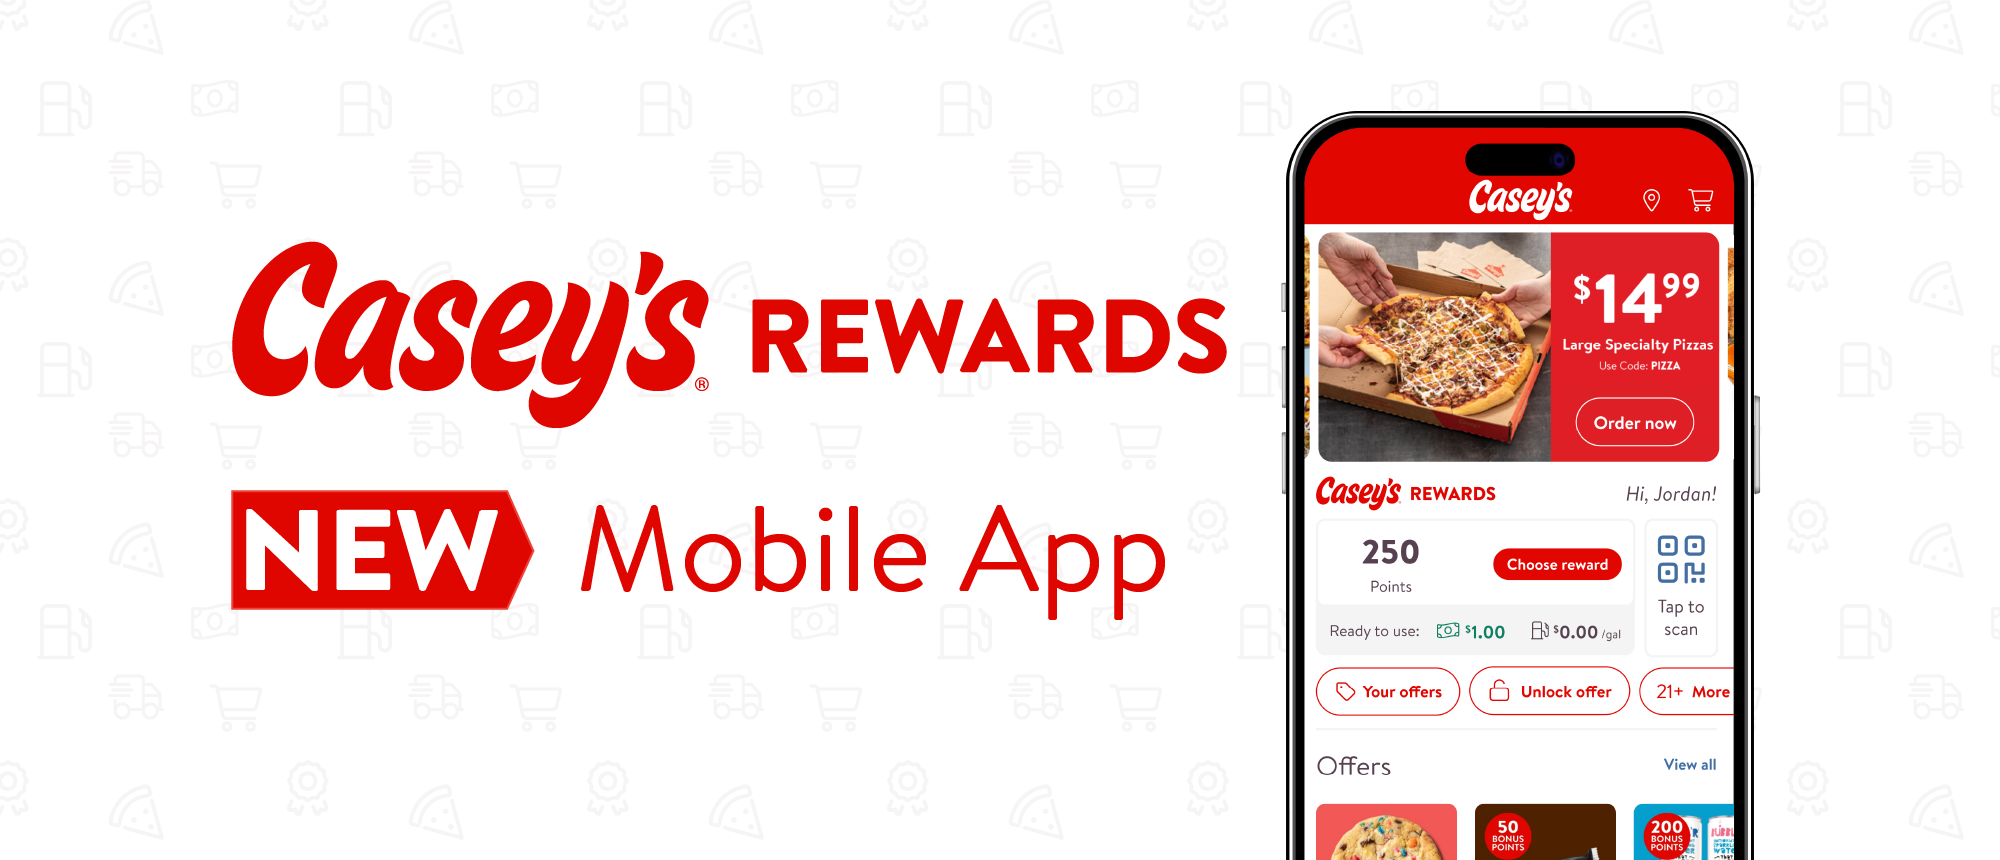 Casey's Rewards NEW Mobile App with phone screen